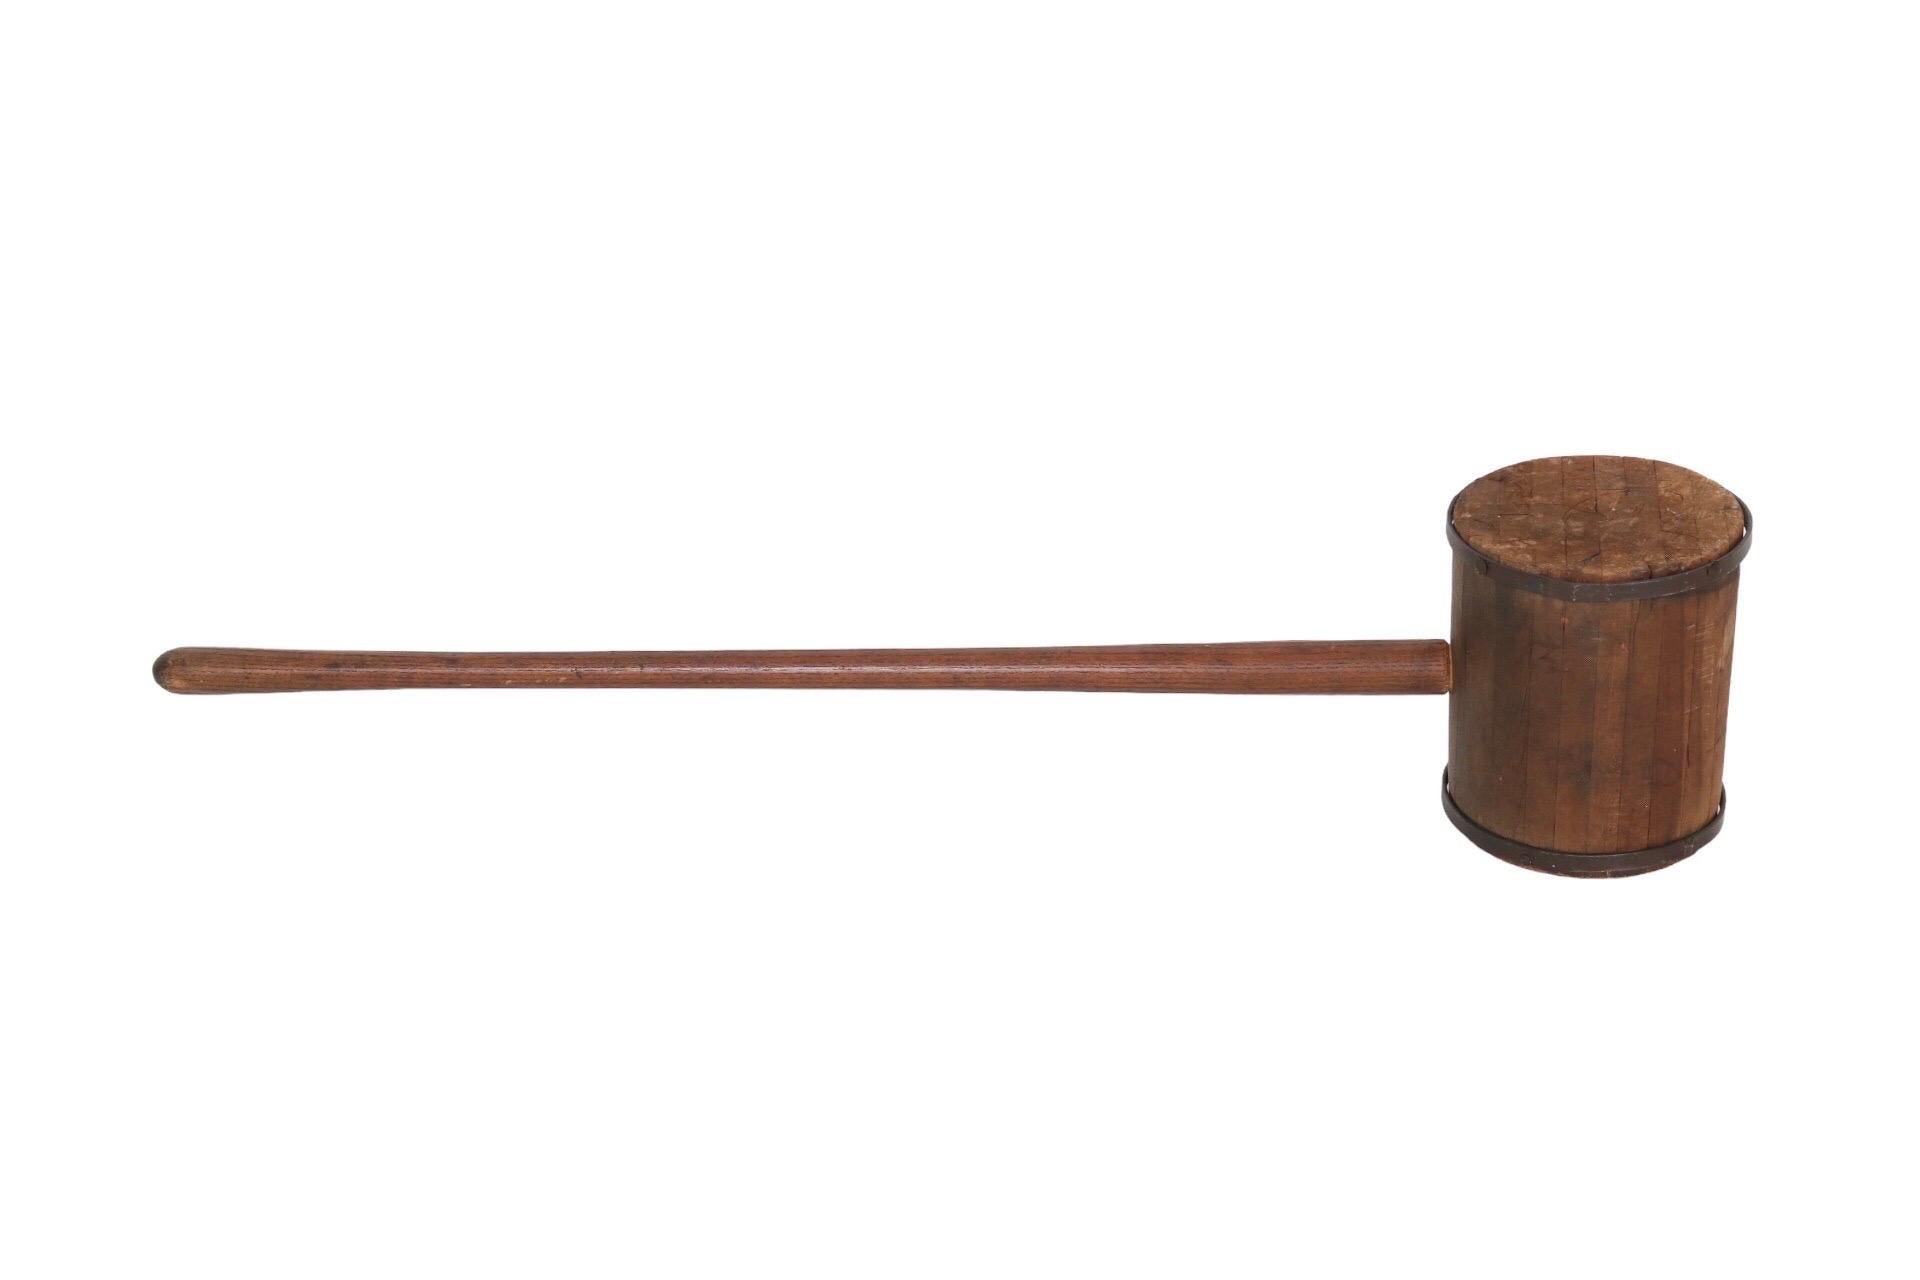 An early 20th century carnival or circus strongman mallet. Made of wood with iron banding around the mallet head. A long handle is ergonomically carved to be comfortable when held.
 